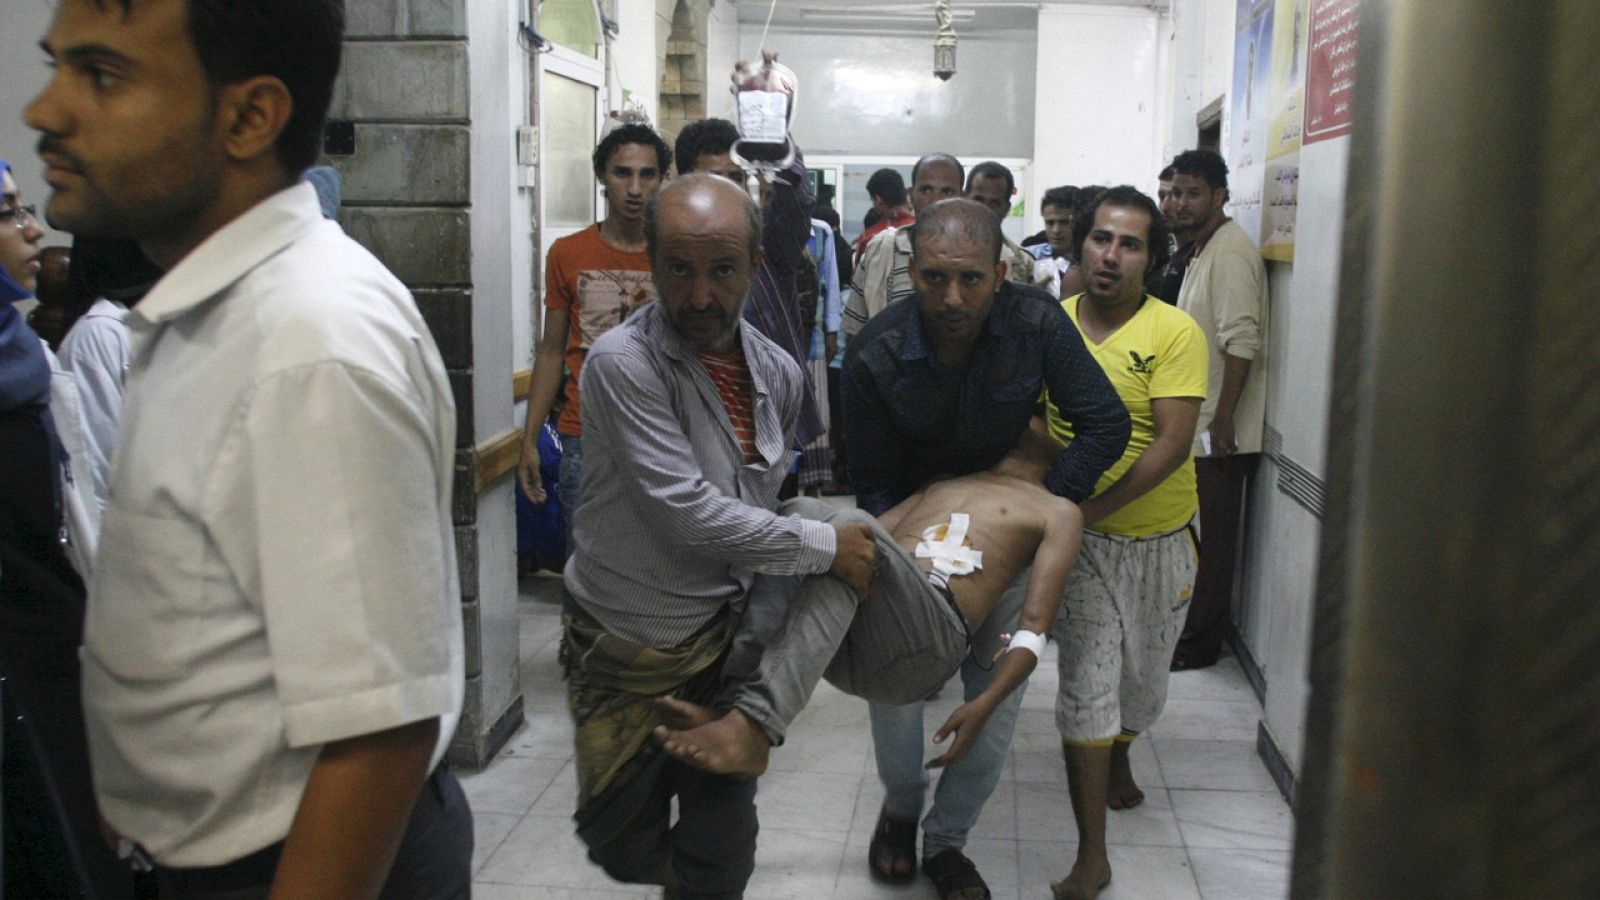 People carry a man at a hospital after he was injured by a shelling during clashes between Houthi militants and pro-government militants in Yemen's southwestern city of Taiz